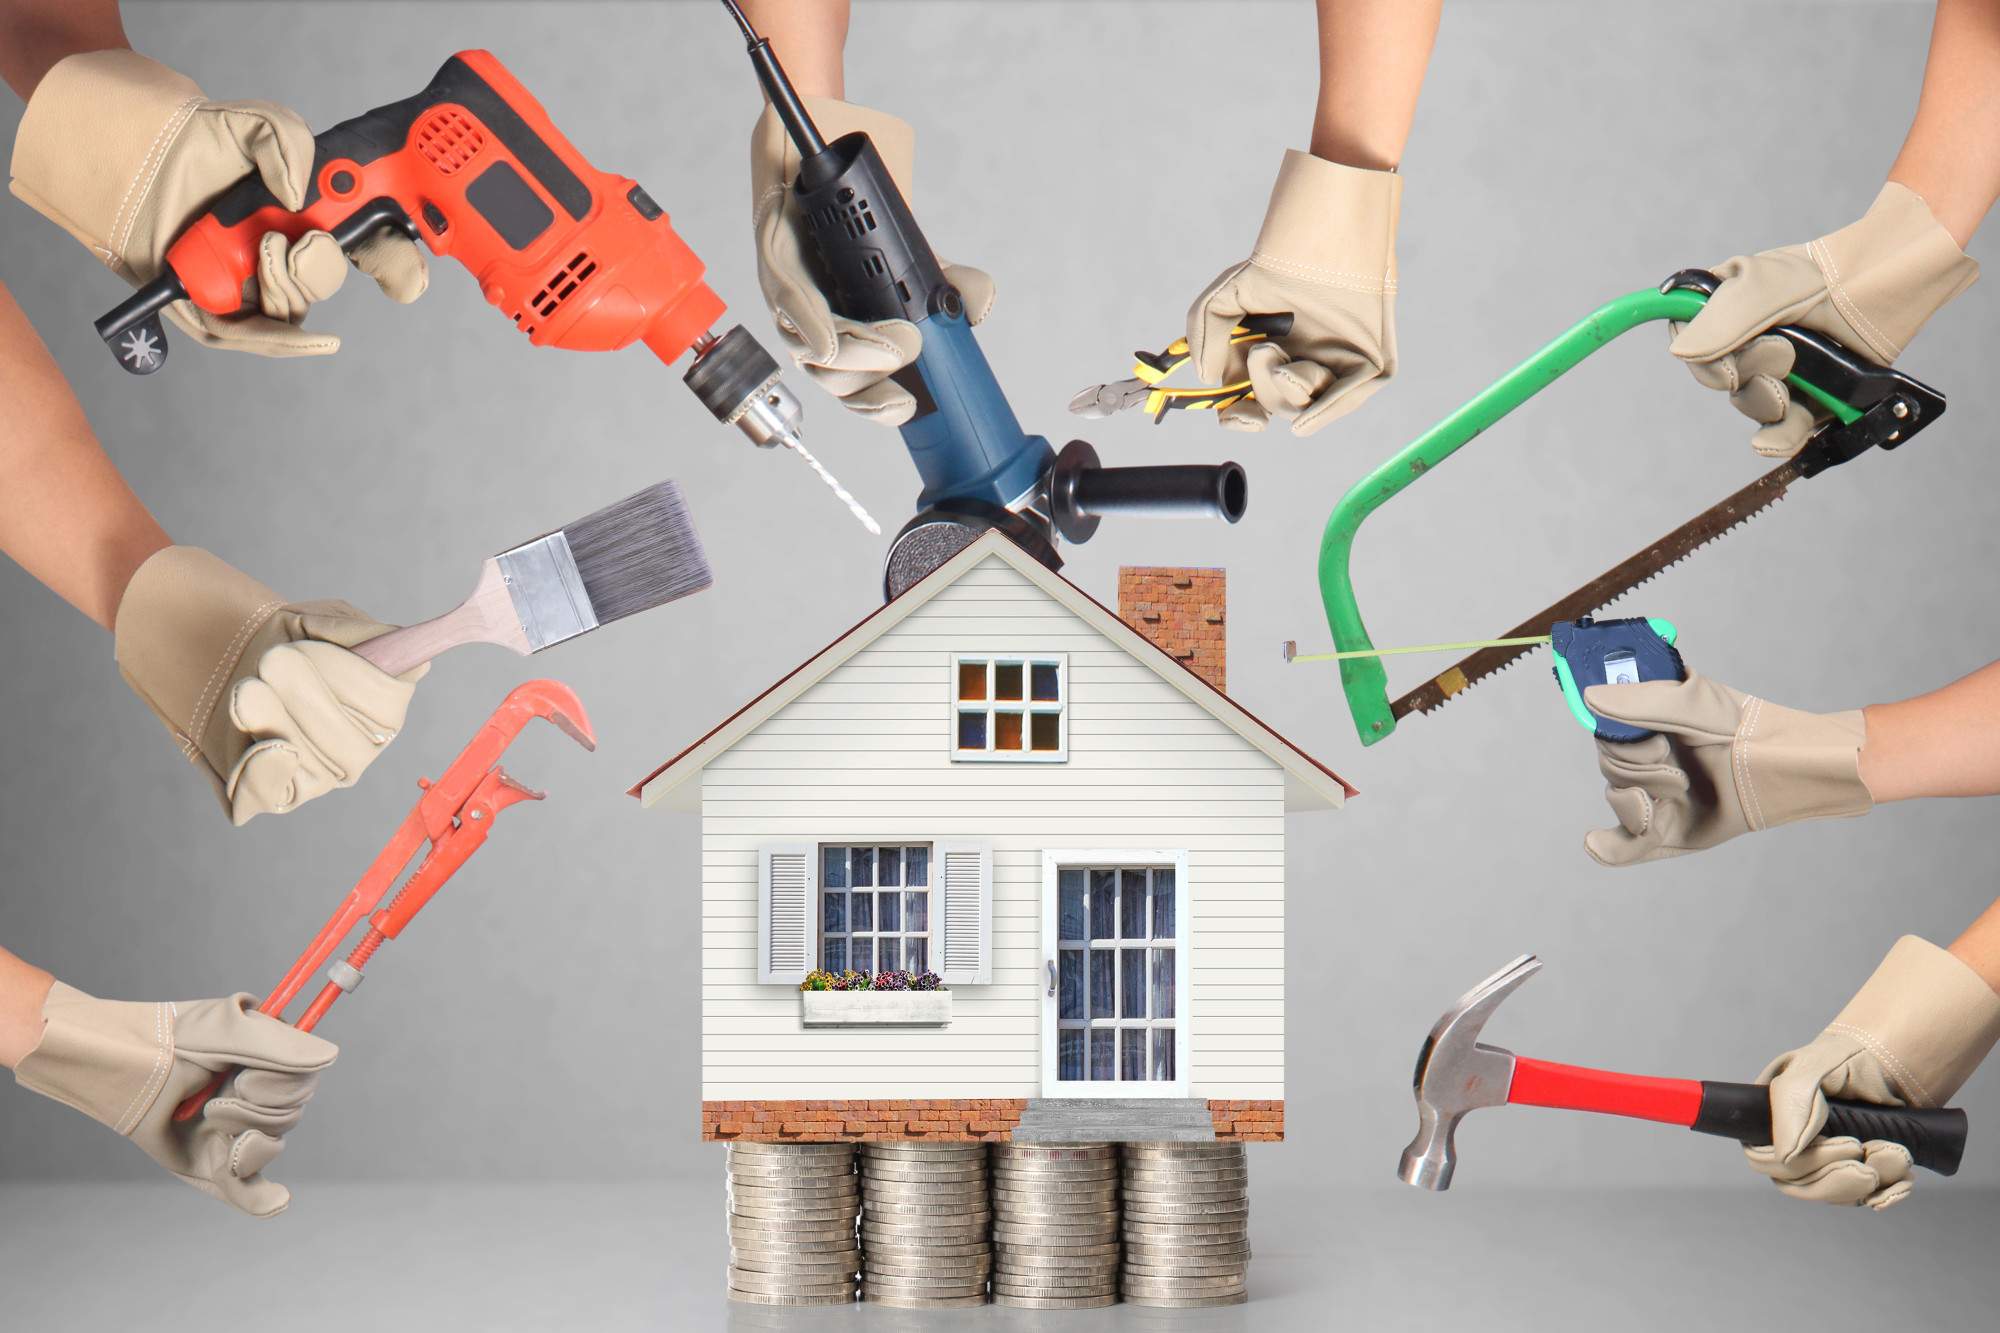 Home Improvement Contractors: How to Find the Right One for You